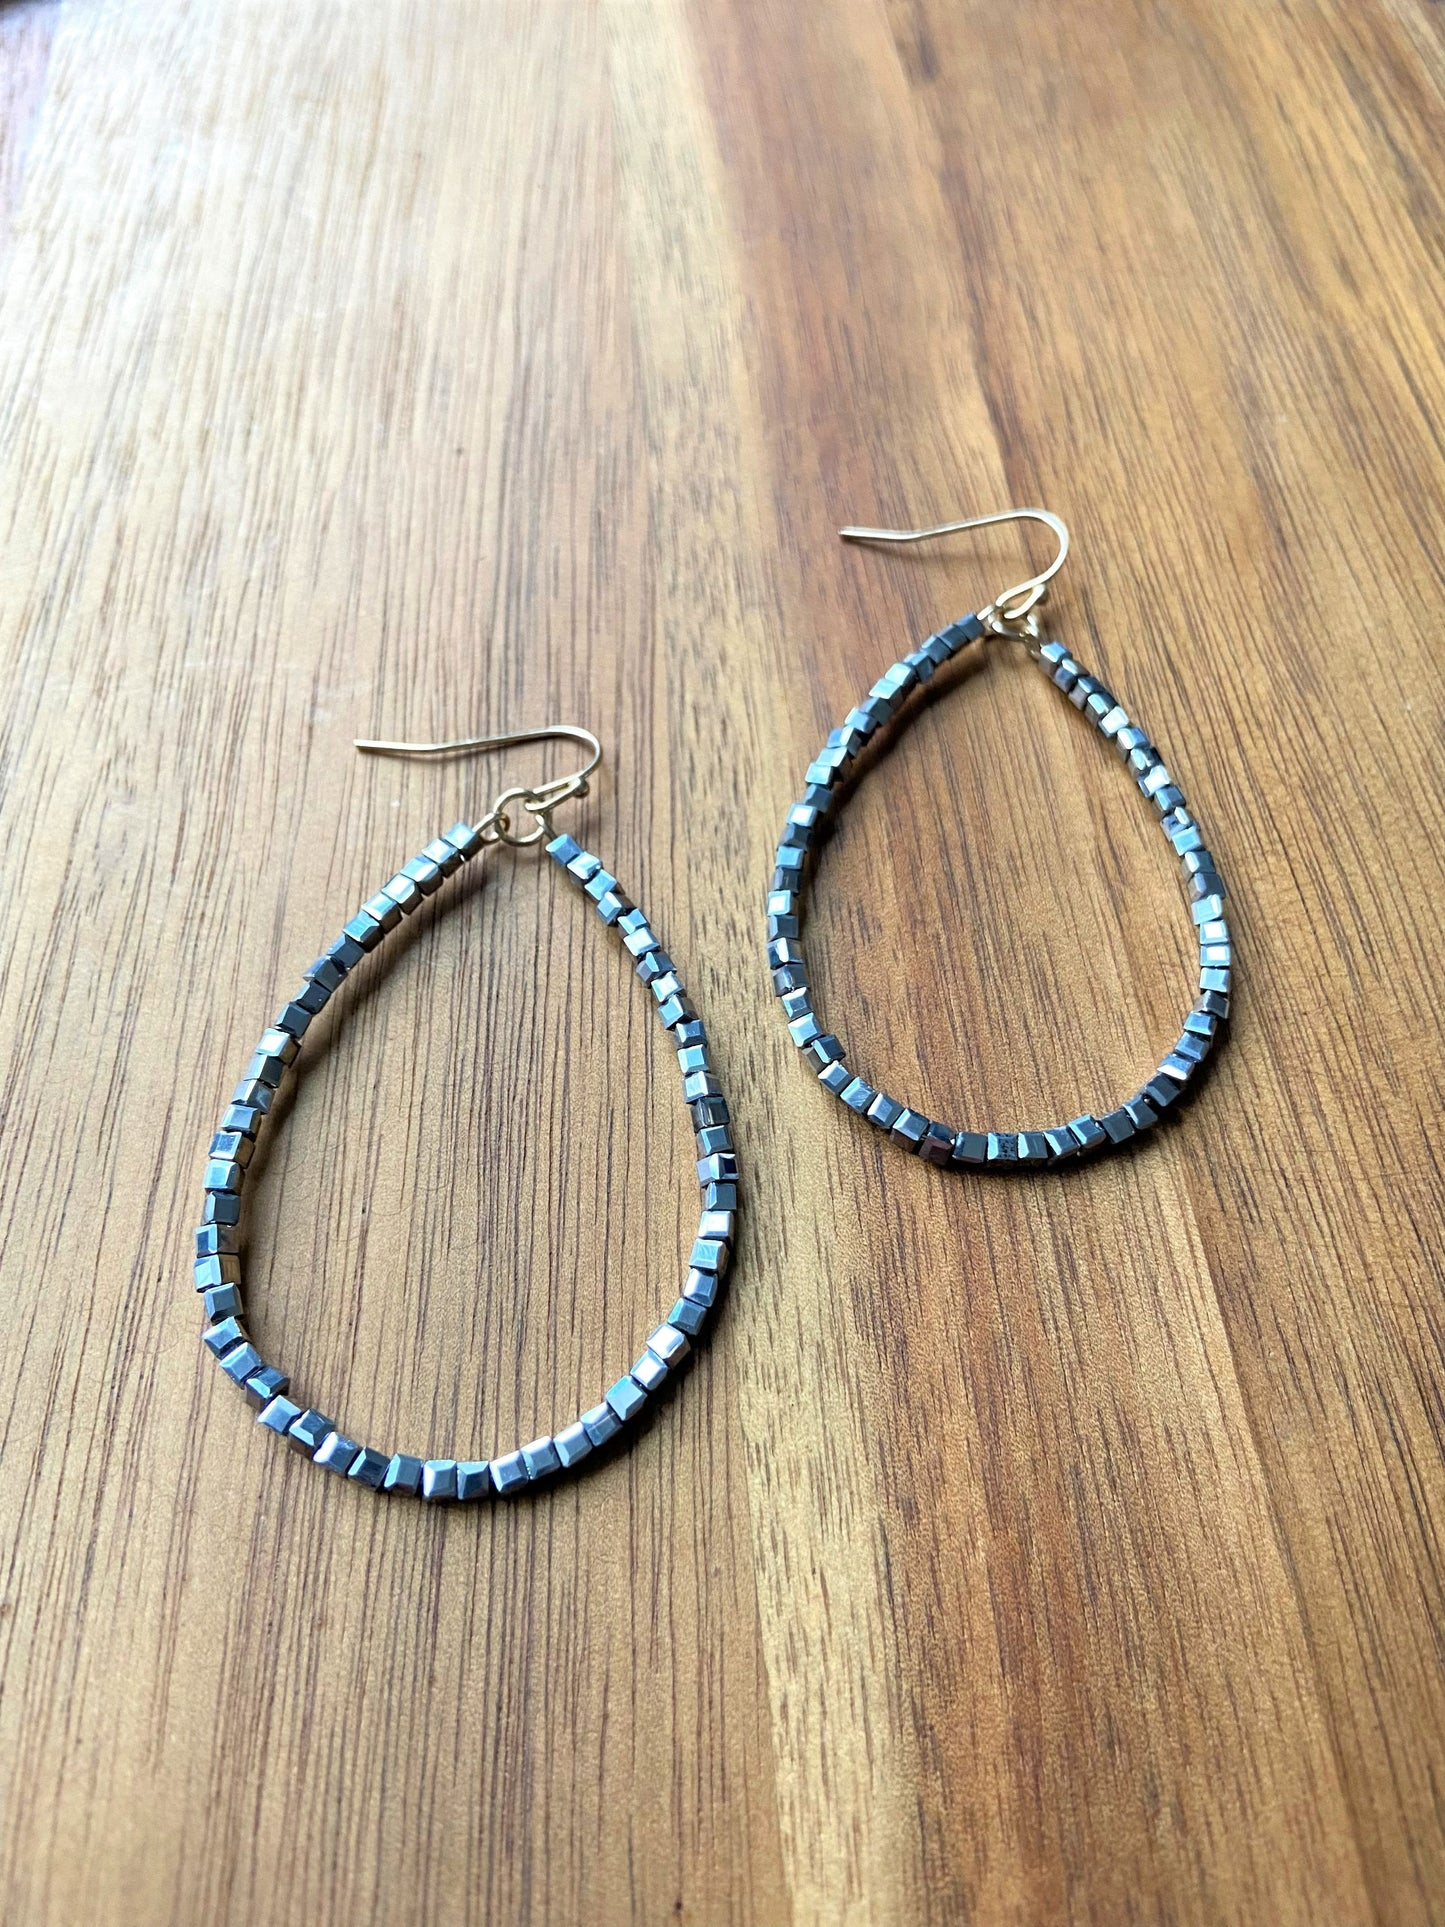 Going Out Earrings